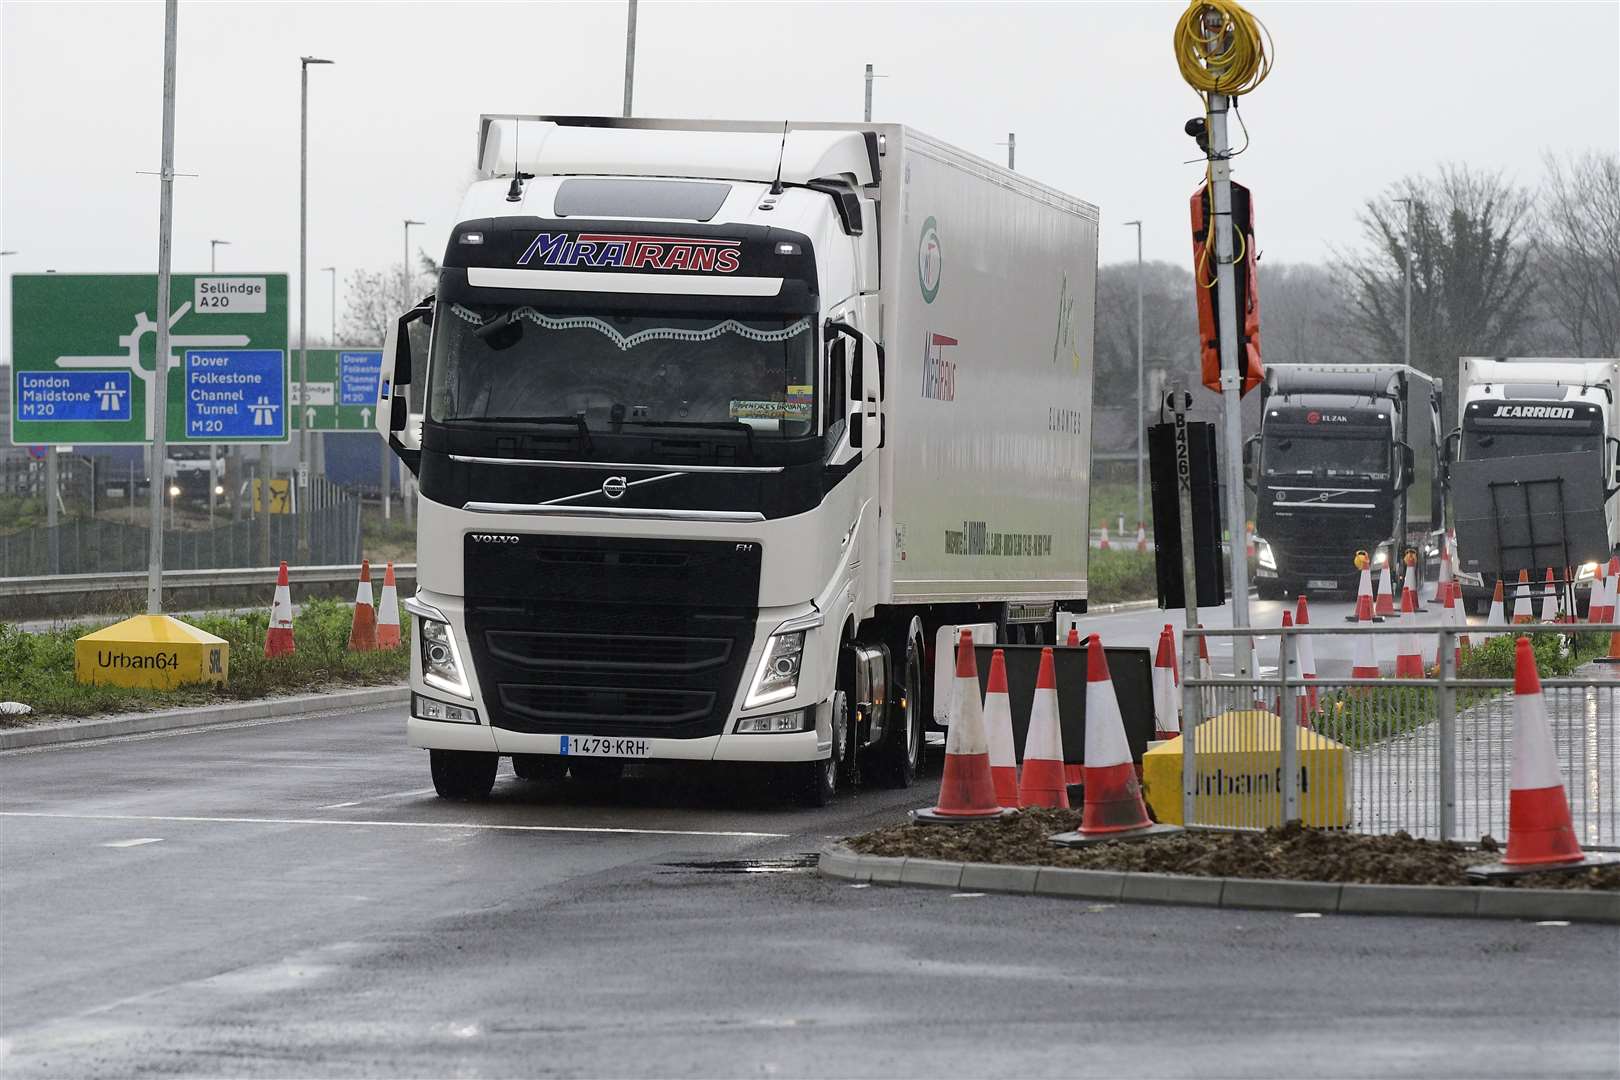 An FOI request about the post-Brexit lorry park at Sevington, near Ashford, resulted in a surprising response. Picture: Barry Goodwin